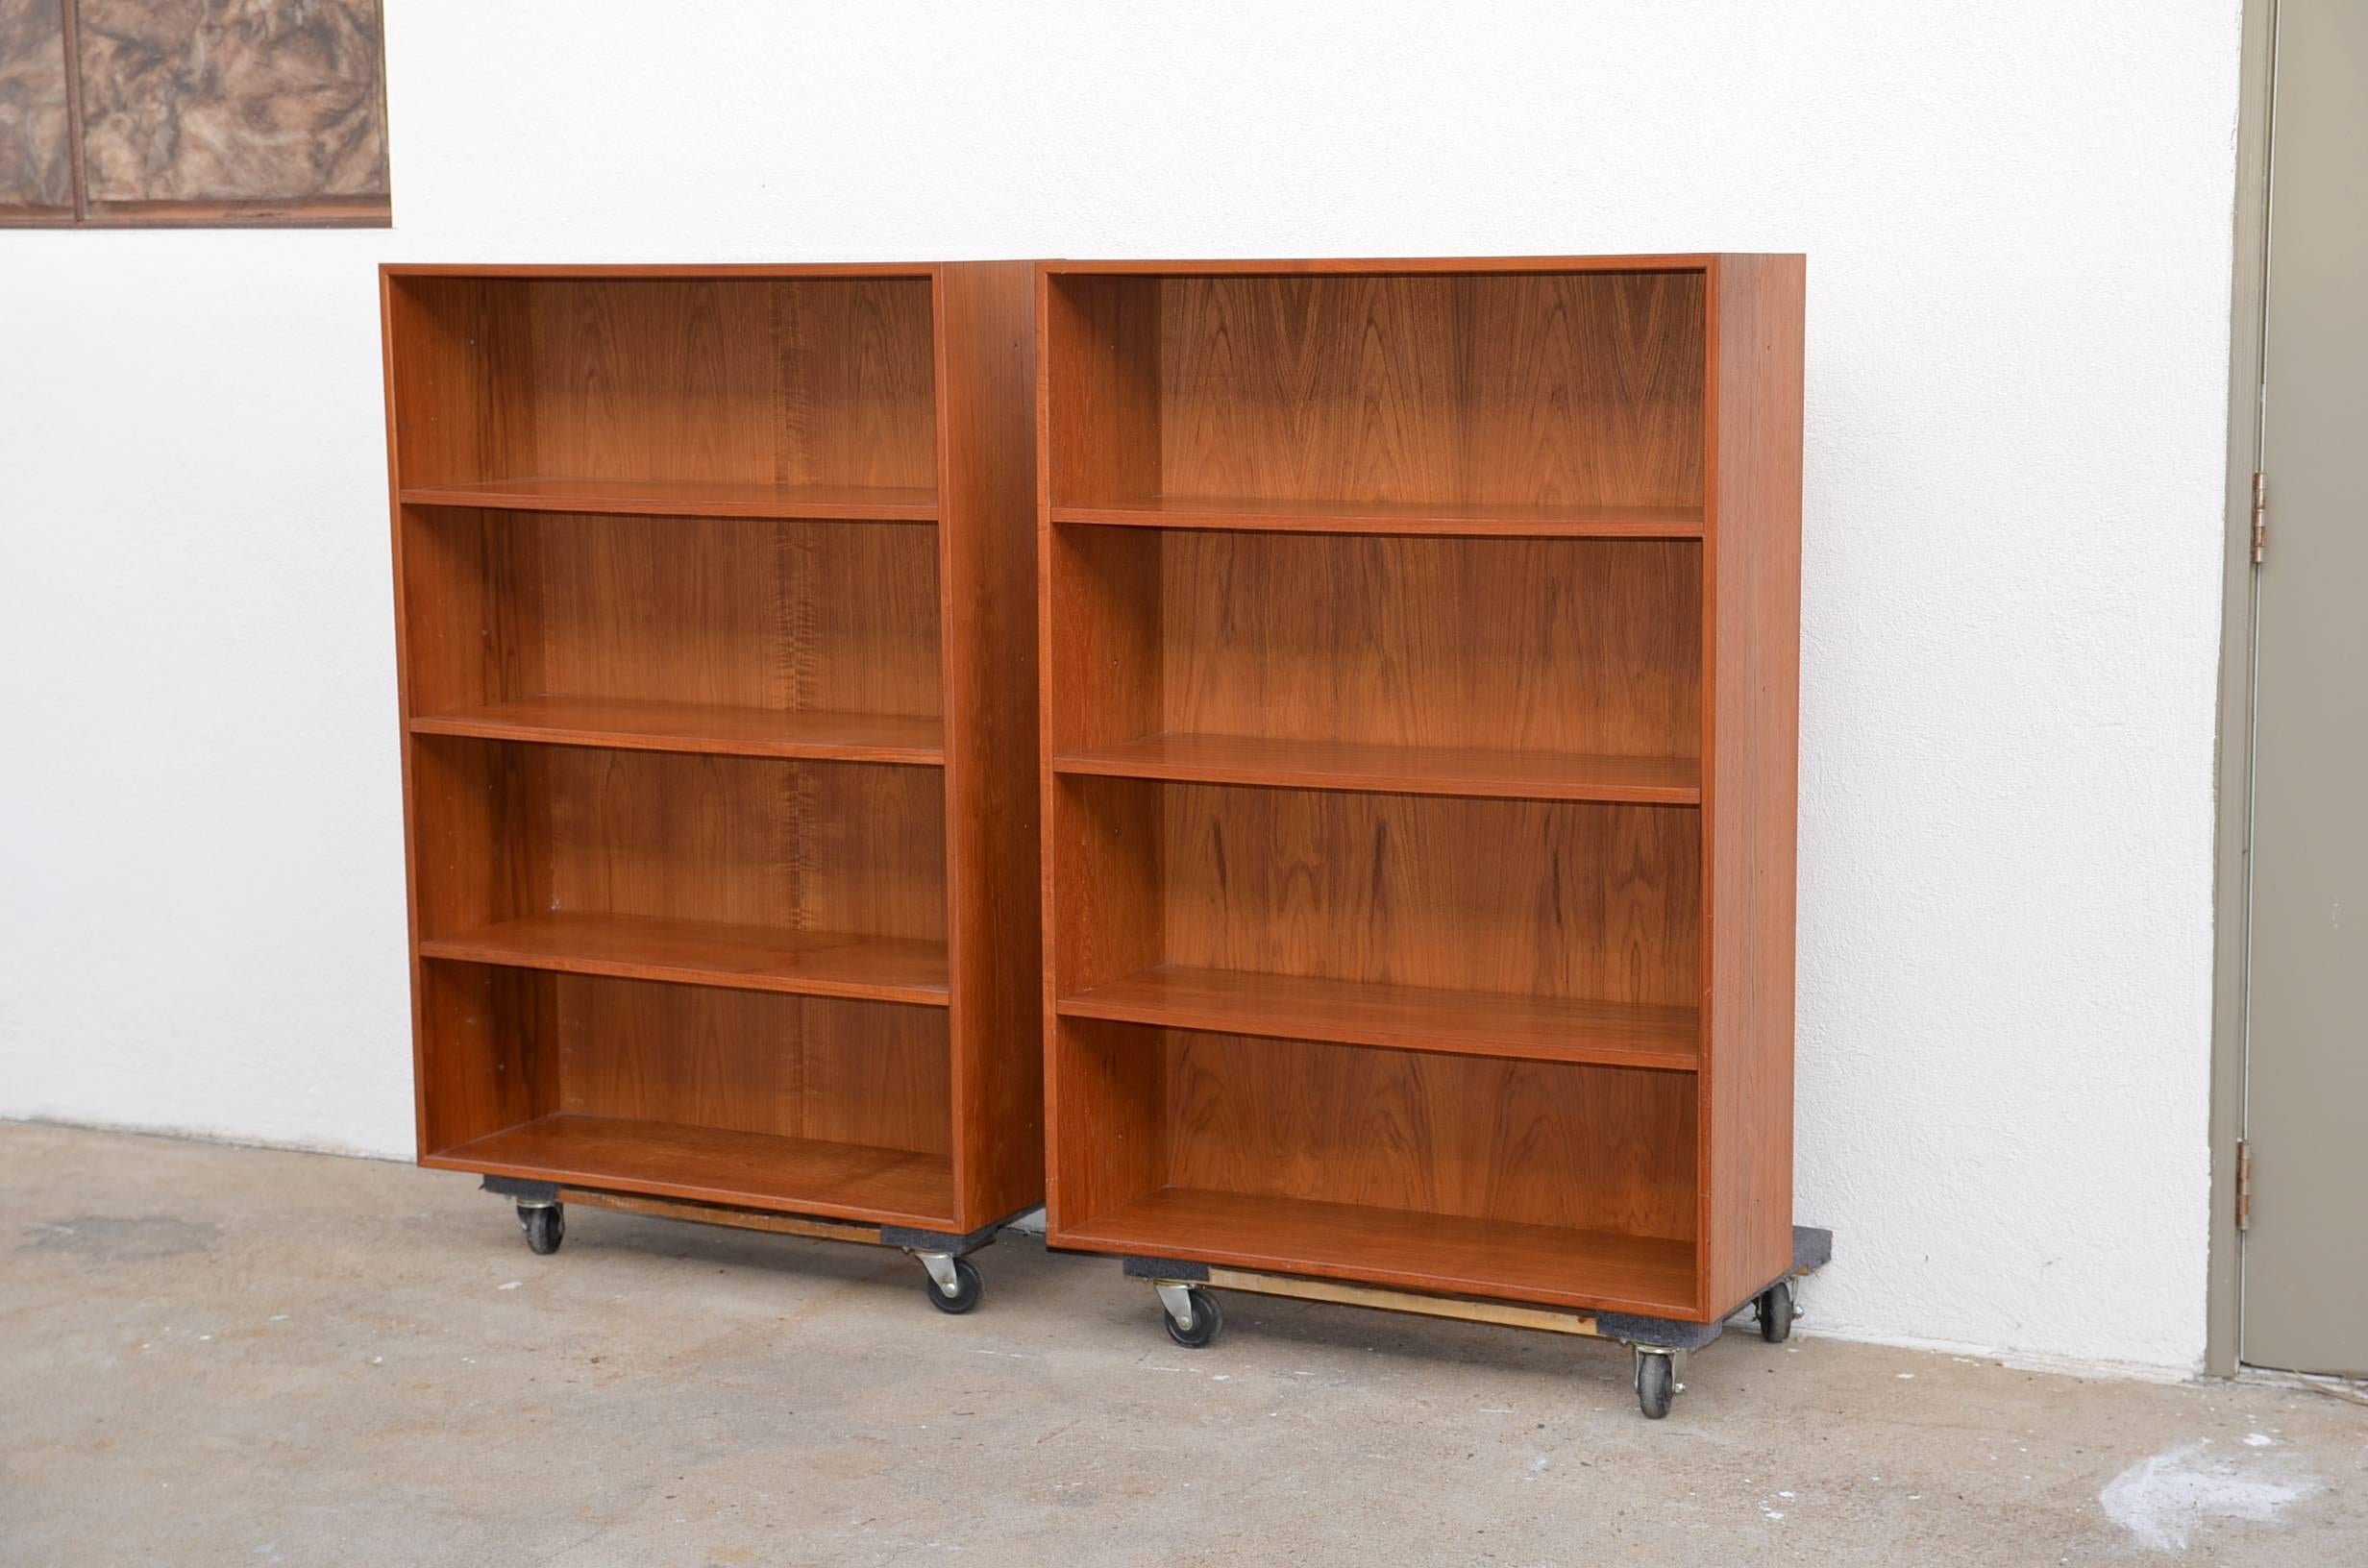 Pair of minimalistic hanging Danish teak shelving units by Dyrlund. Back brackets need to be added for wall mounting.